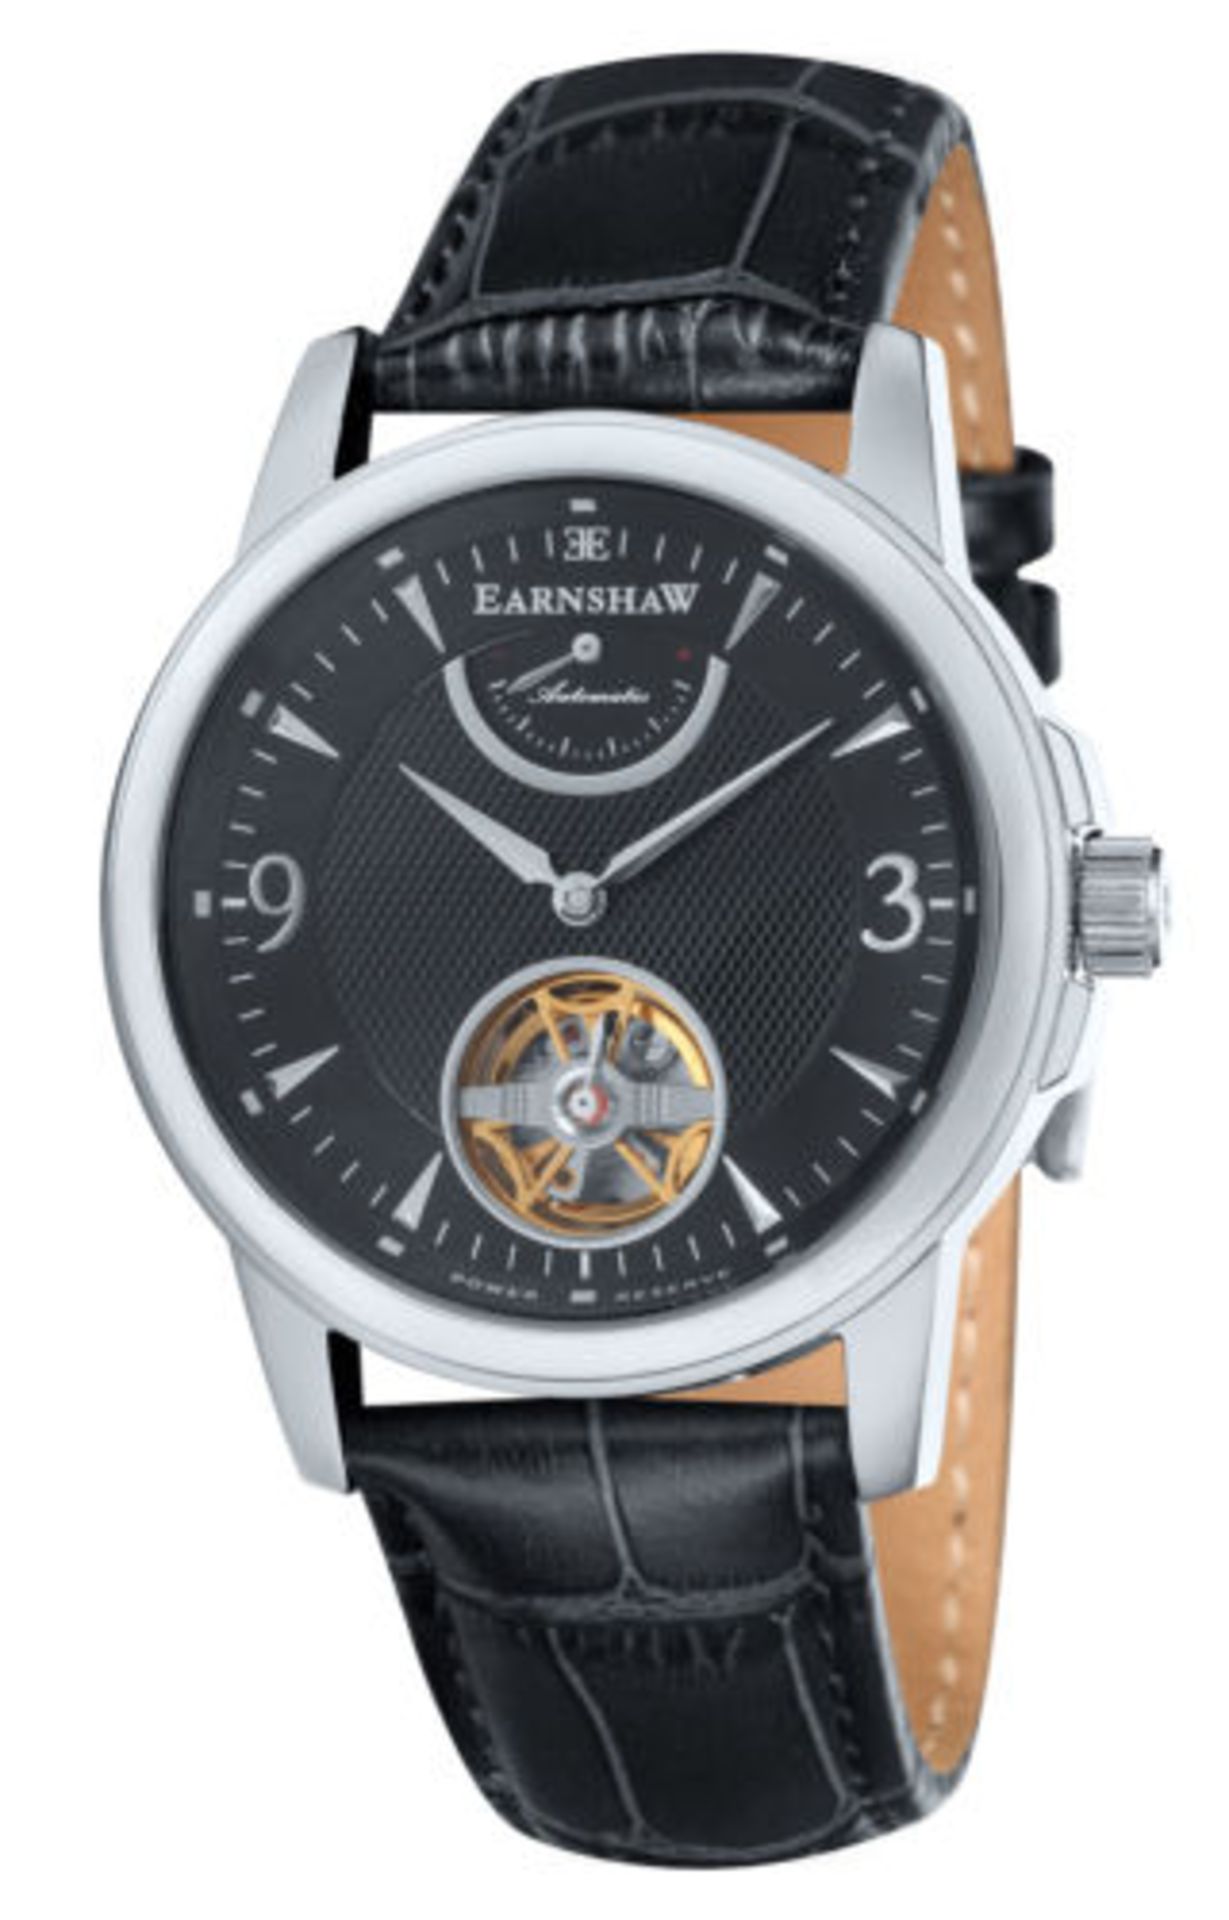 V Brand New Thomas Earnshaw Flinders Automatic Watch With Black Leather Strap RRP £370